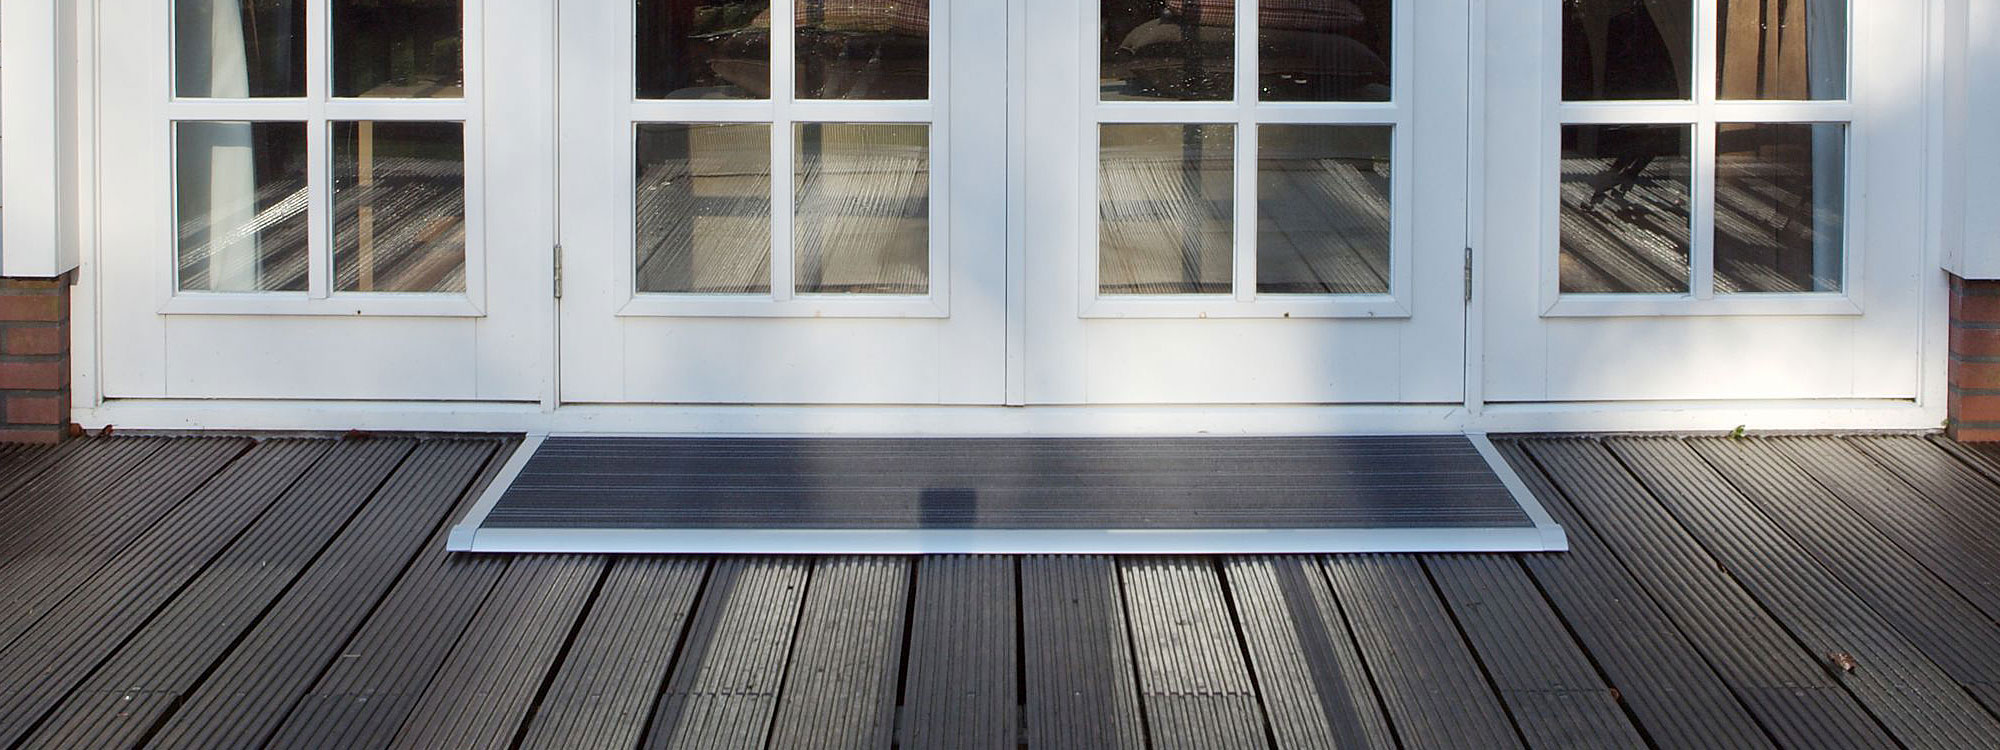 Image of large anodized silver RiZZ The New Standard doormat shown on wooden decking outside white doorway